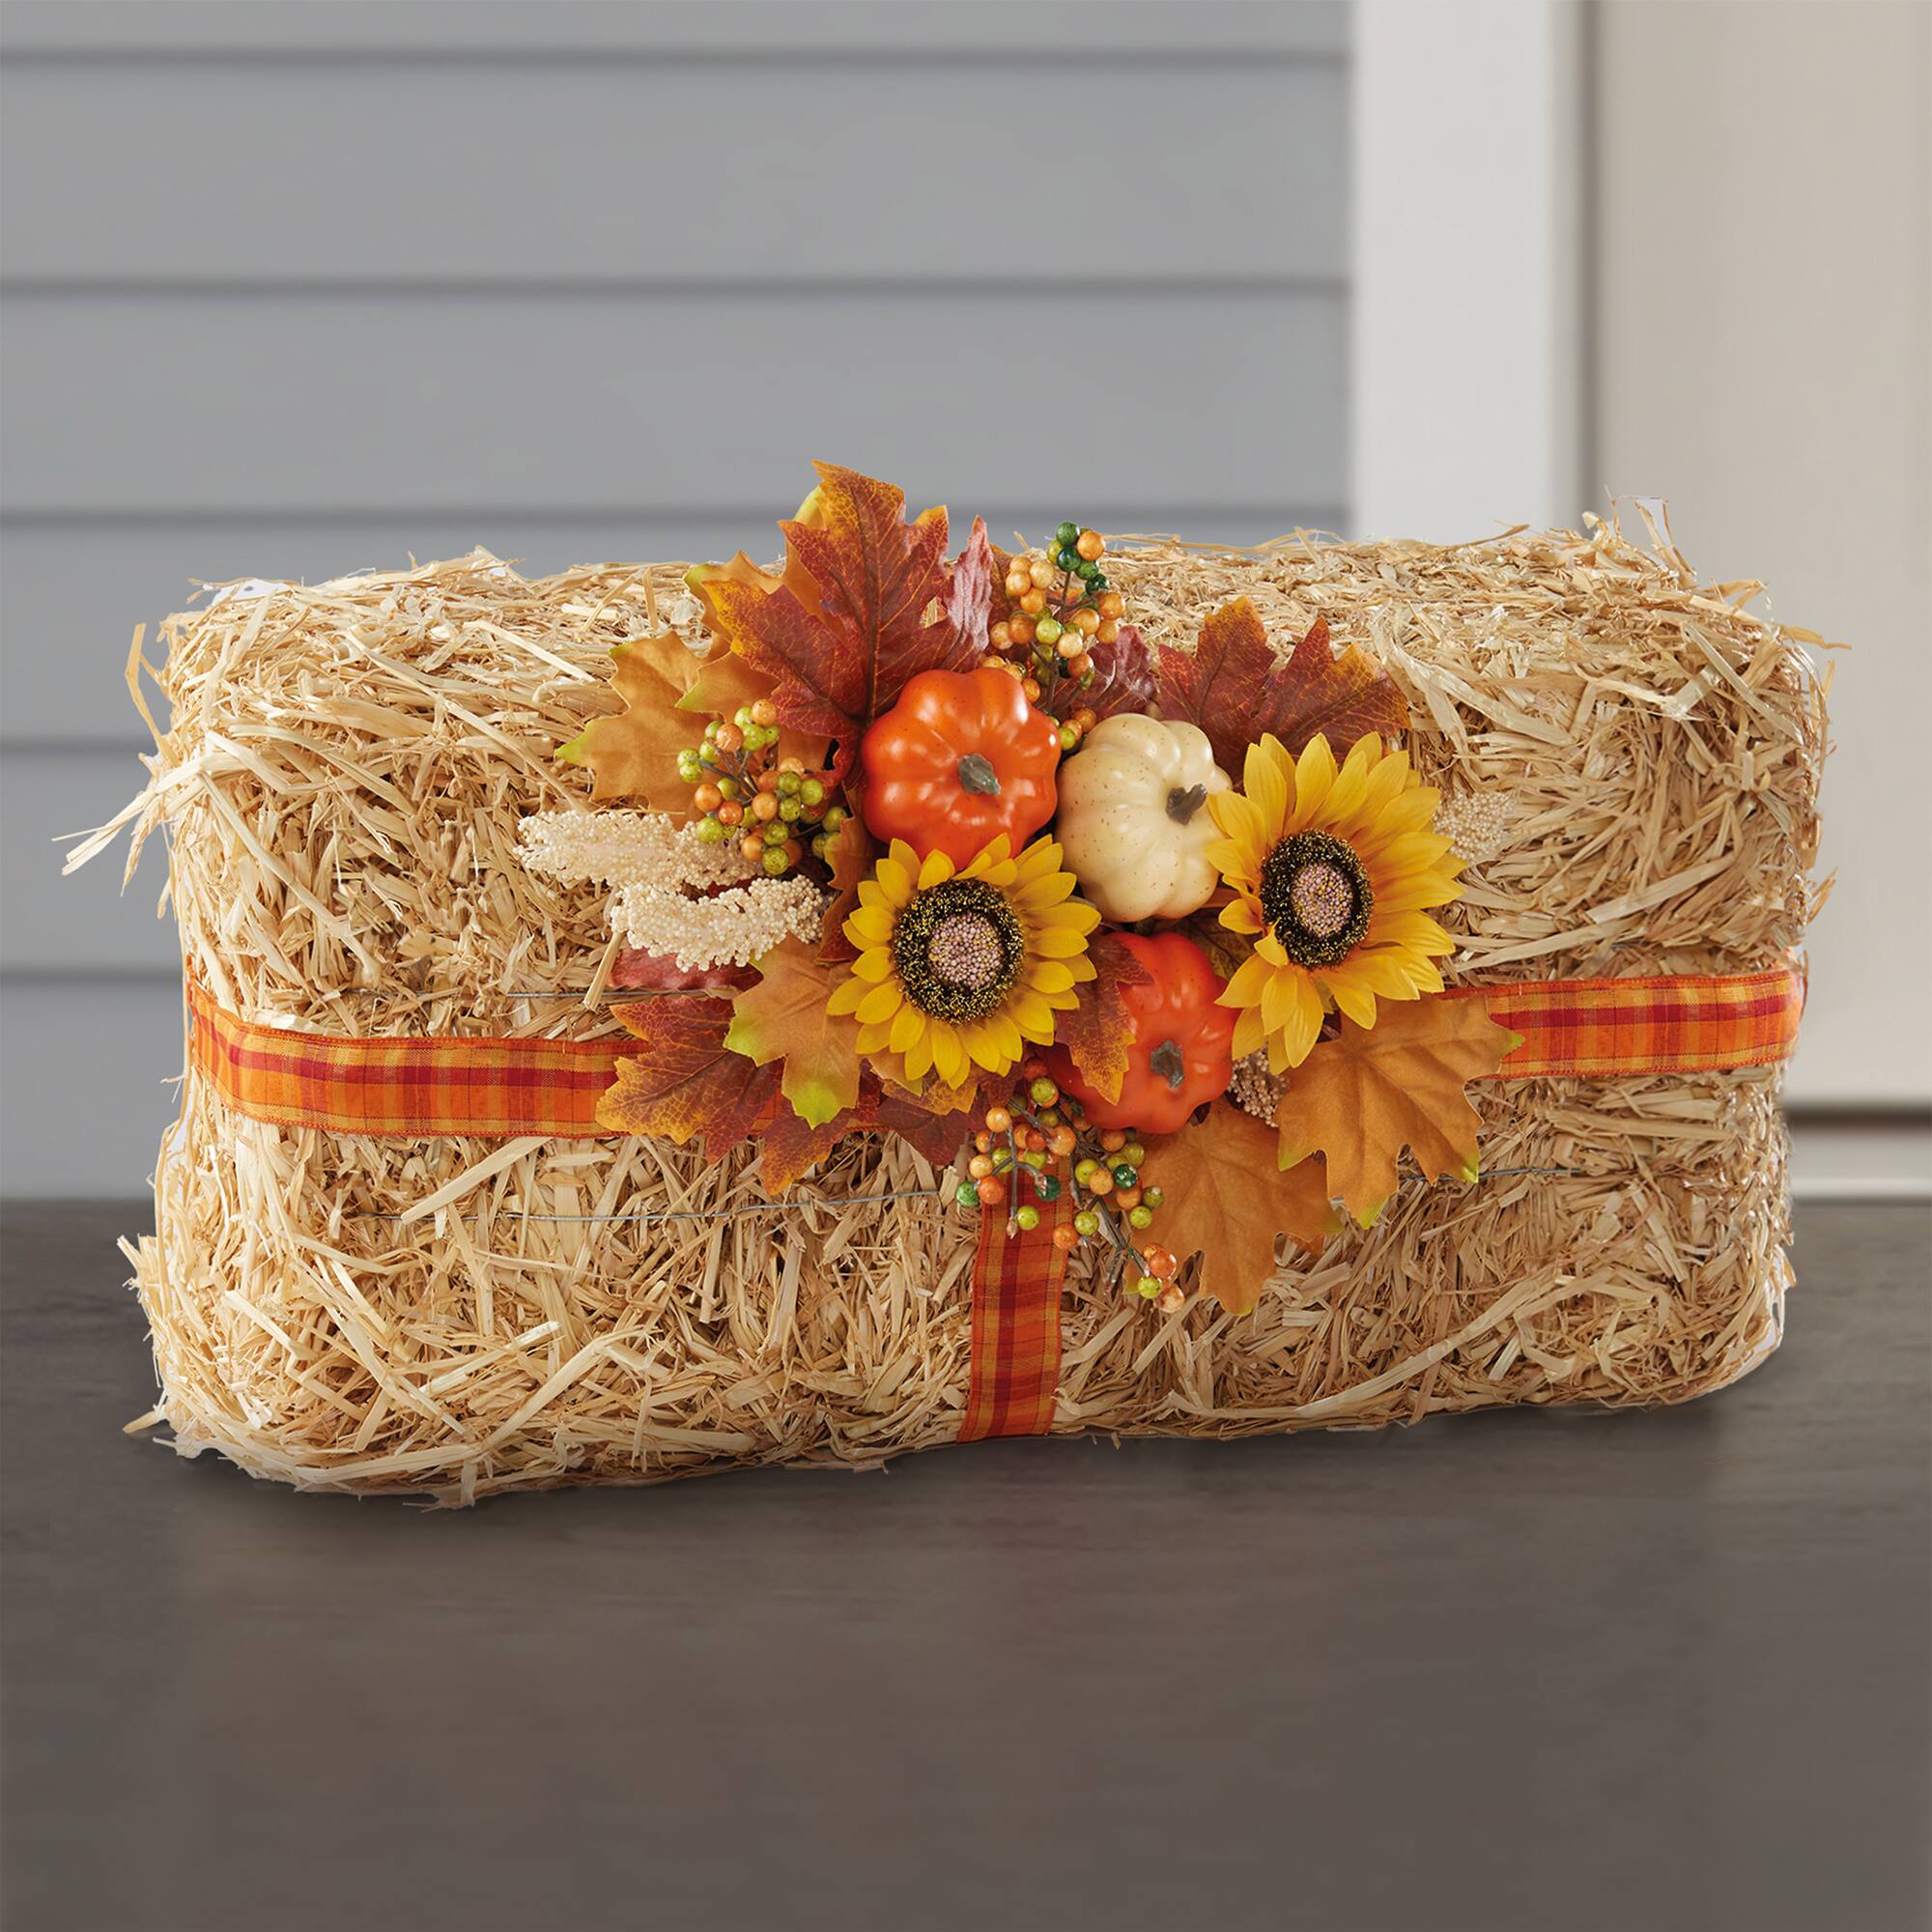 Way to Celebrate! Decorative Straw Bale 9.5 inch x 12 inch x 24 inch  Natural Golden